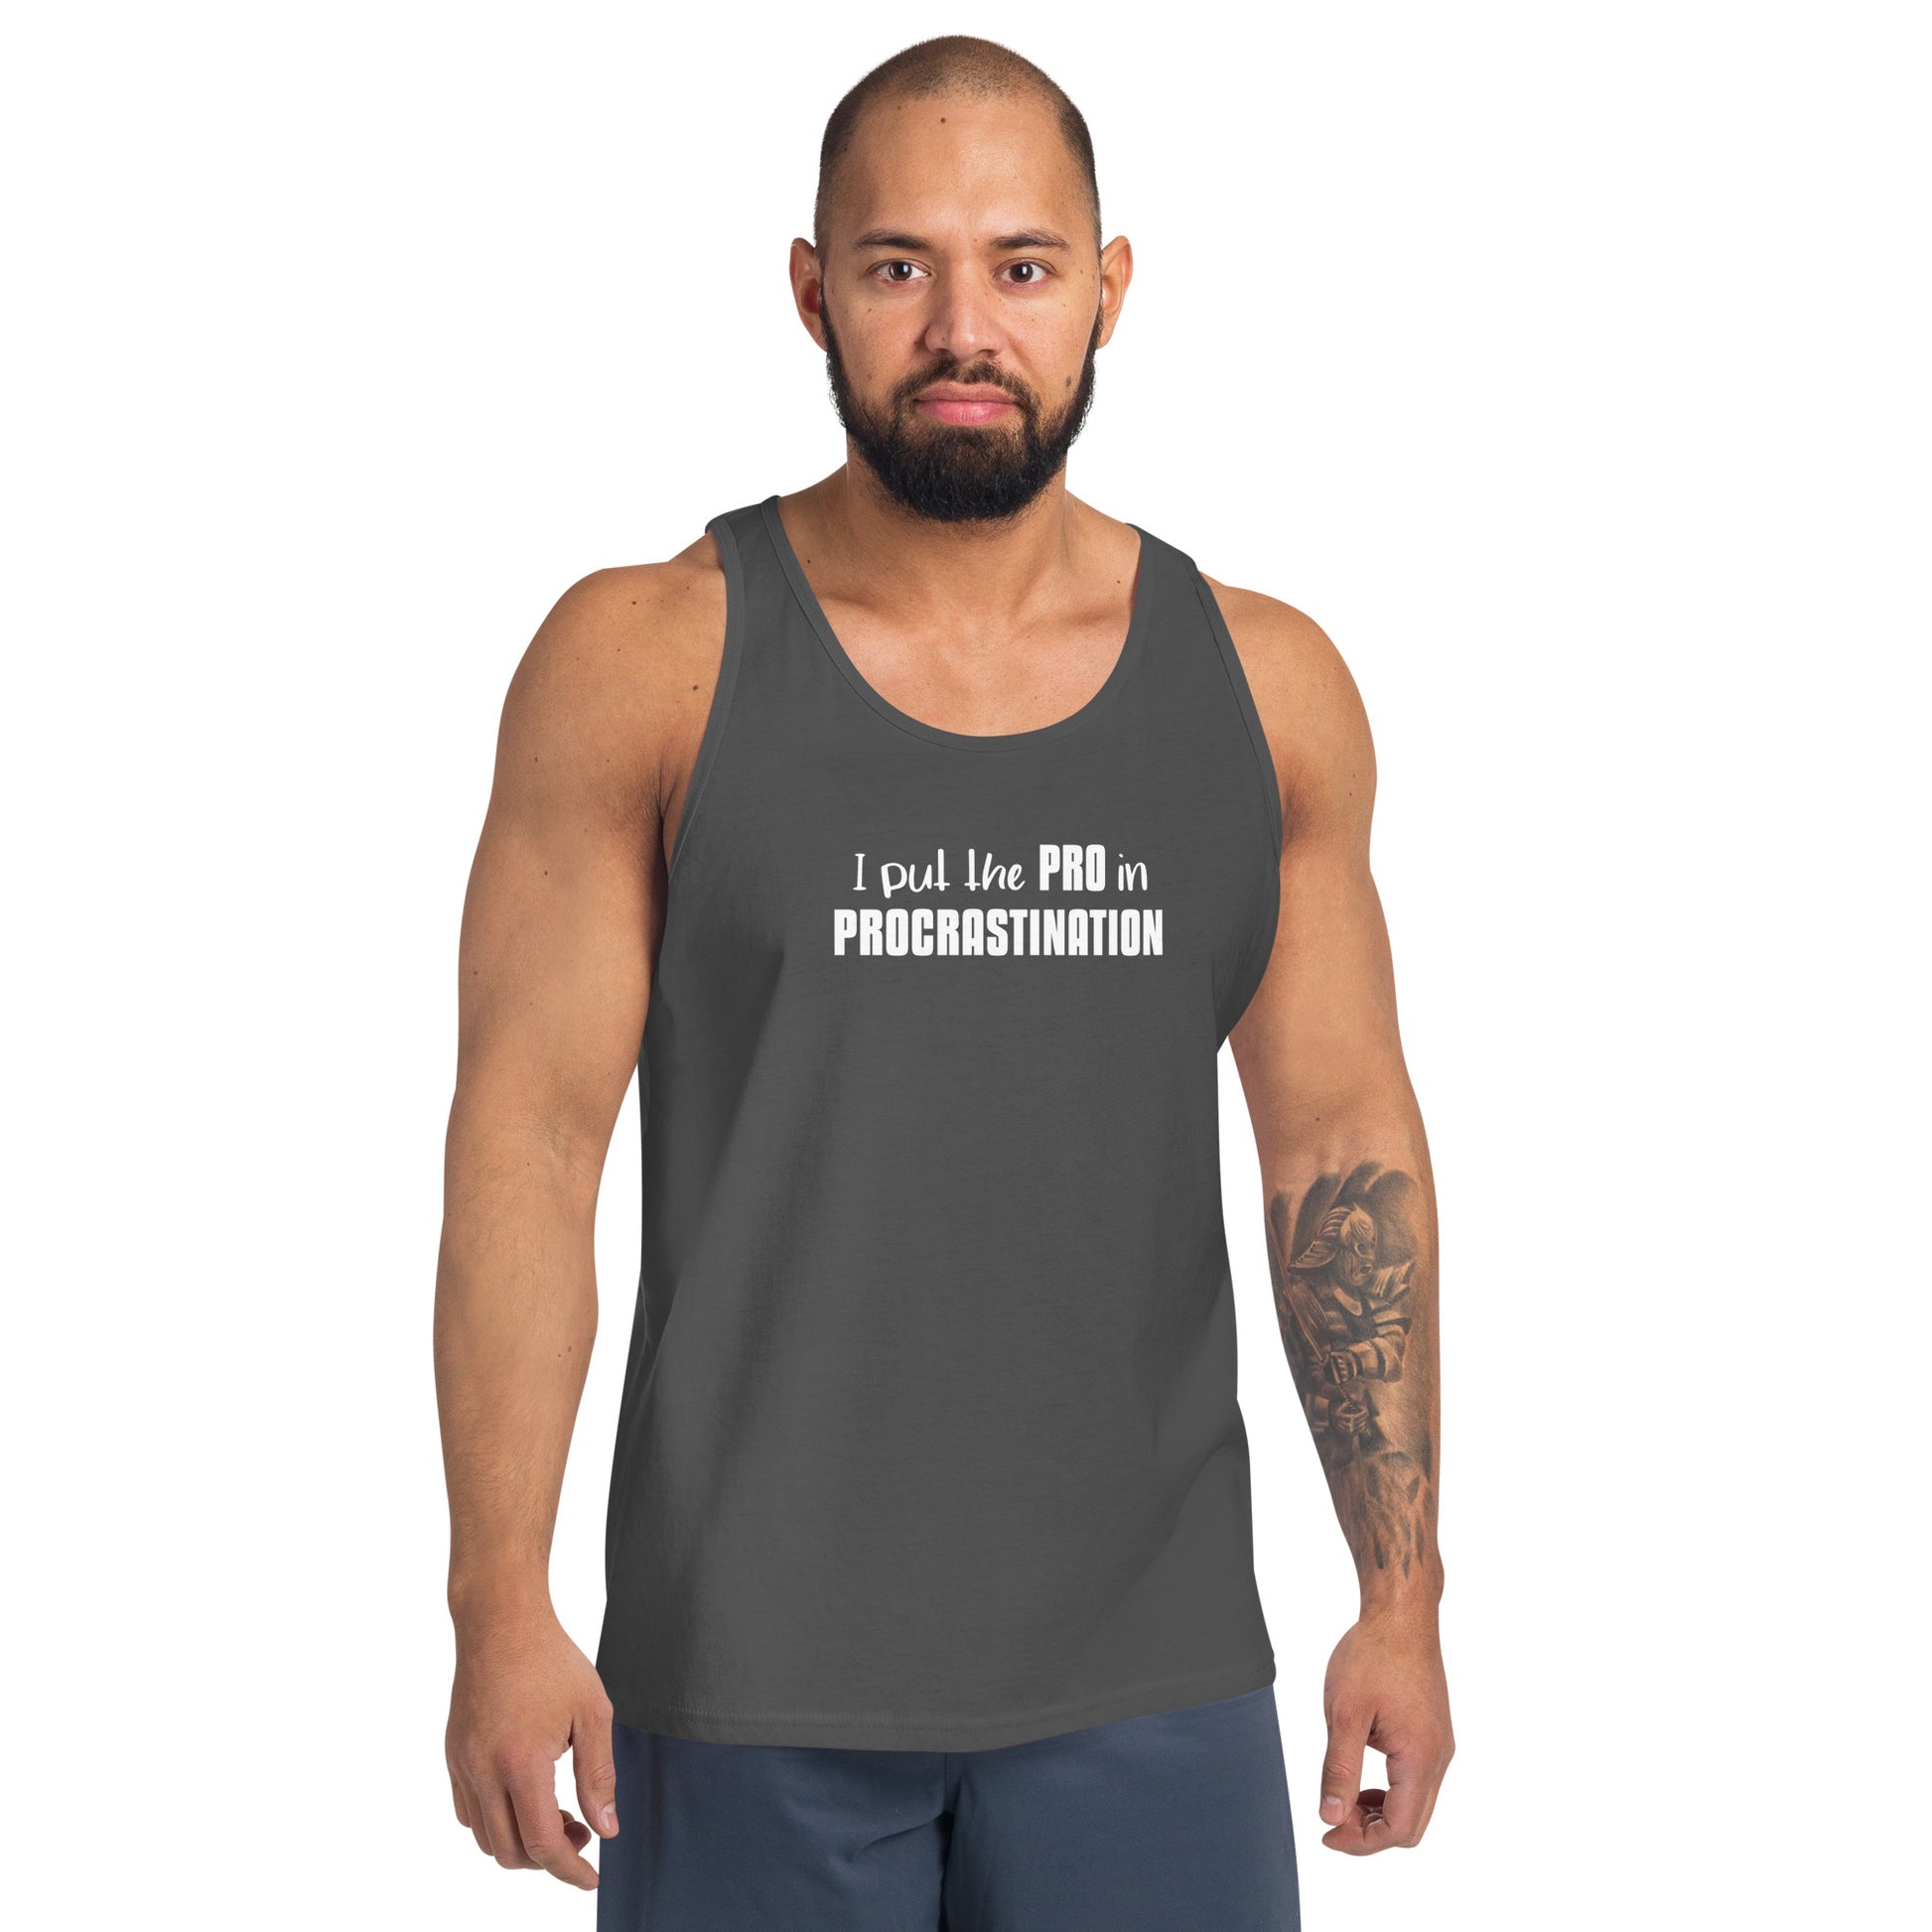 Male model wearing Asphalt unisex tank top with text graphic: "I put the PRO in PROCRASTINATION"